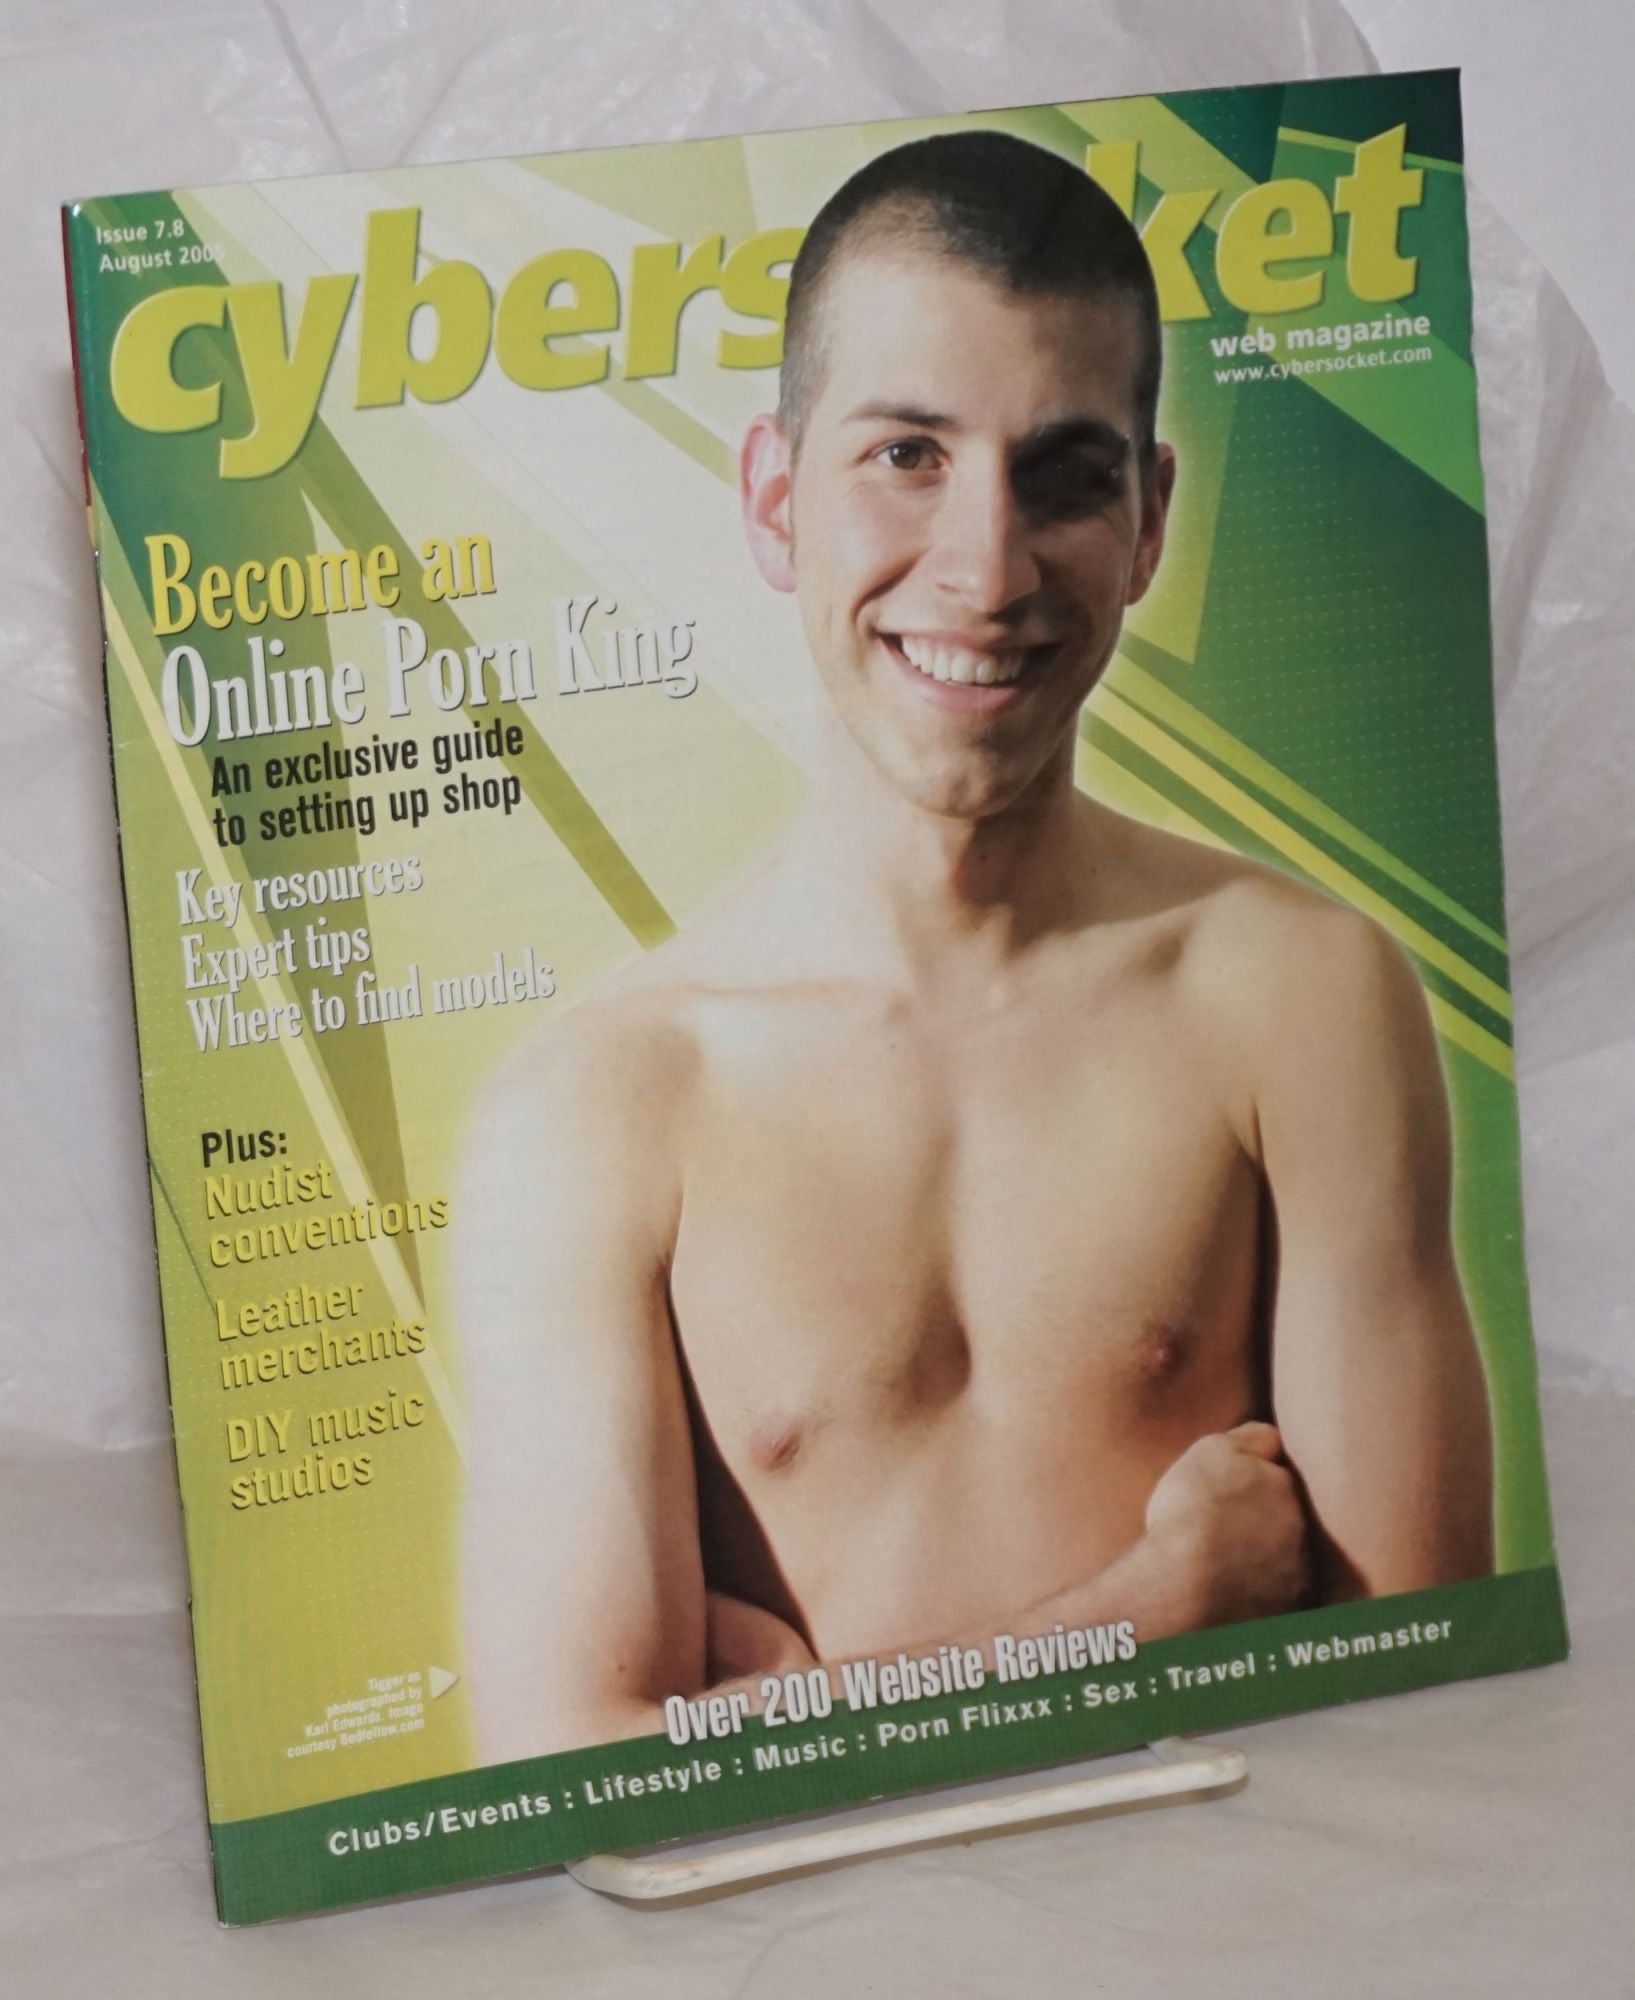 Cybersocket Web Magazine issue 7.8, August 2005; Become an Online Porn King Patrick Neighly